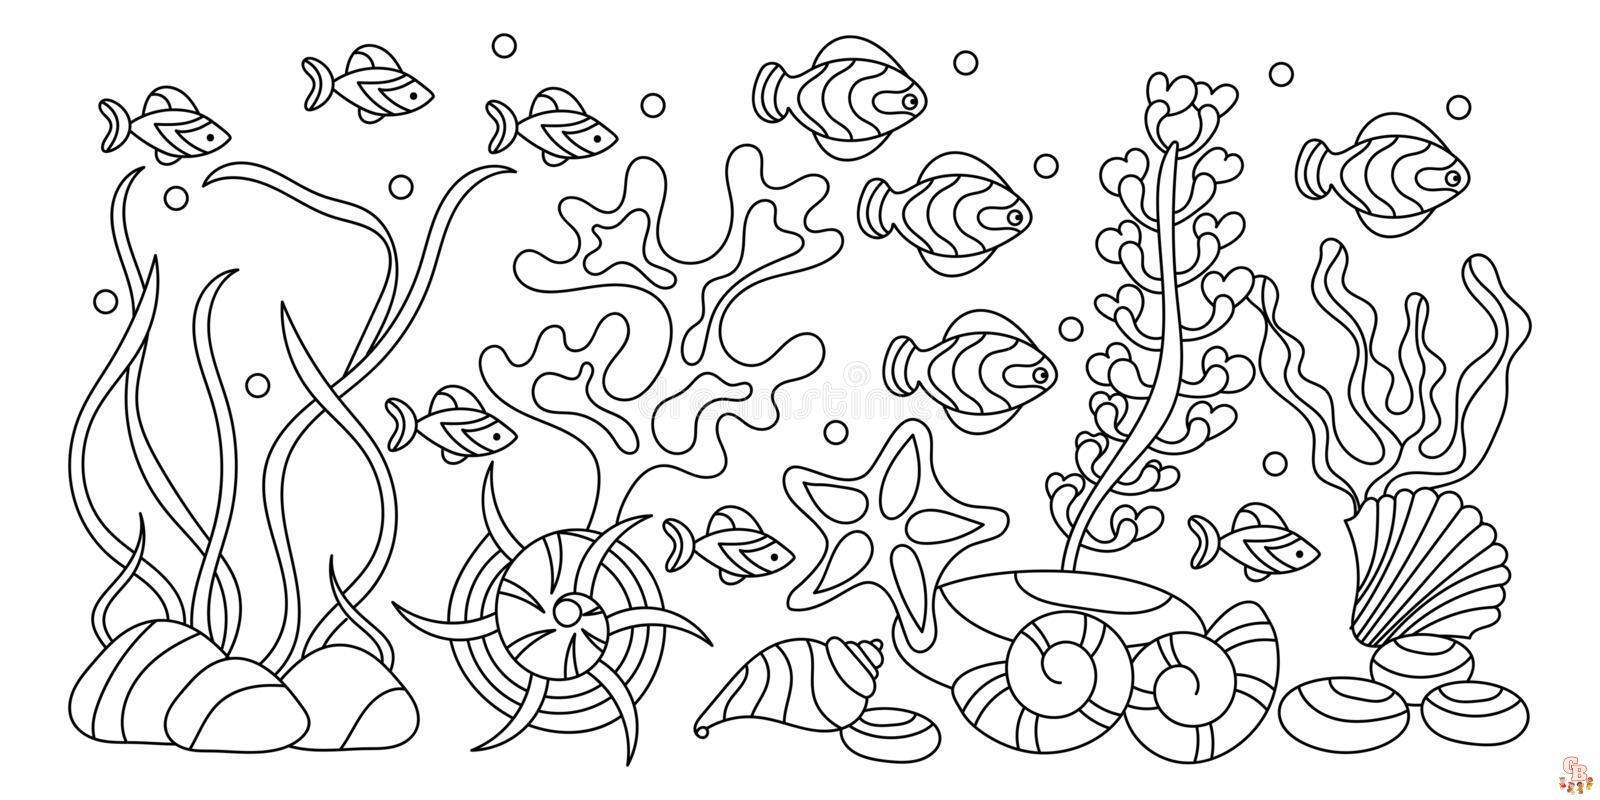 Underwater Coloring Pages 4